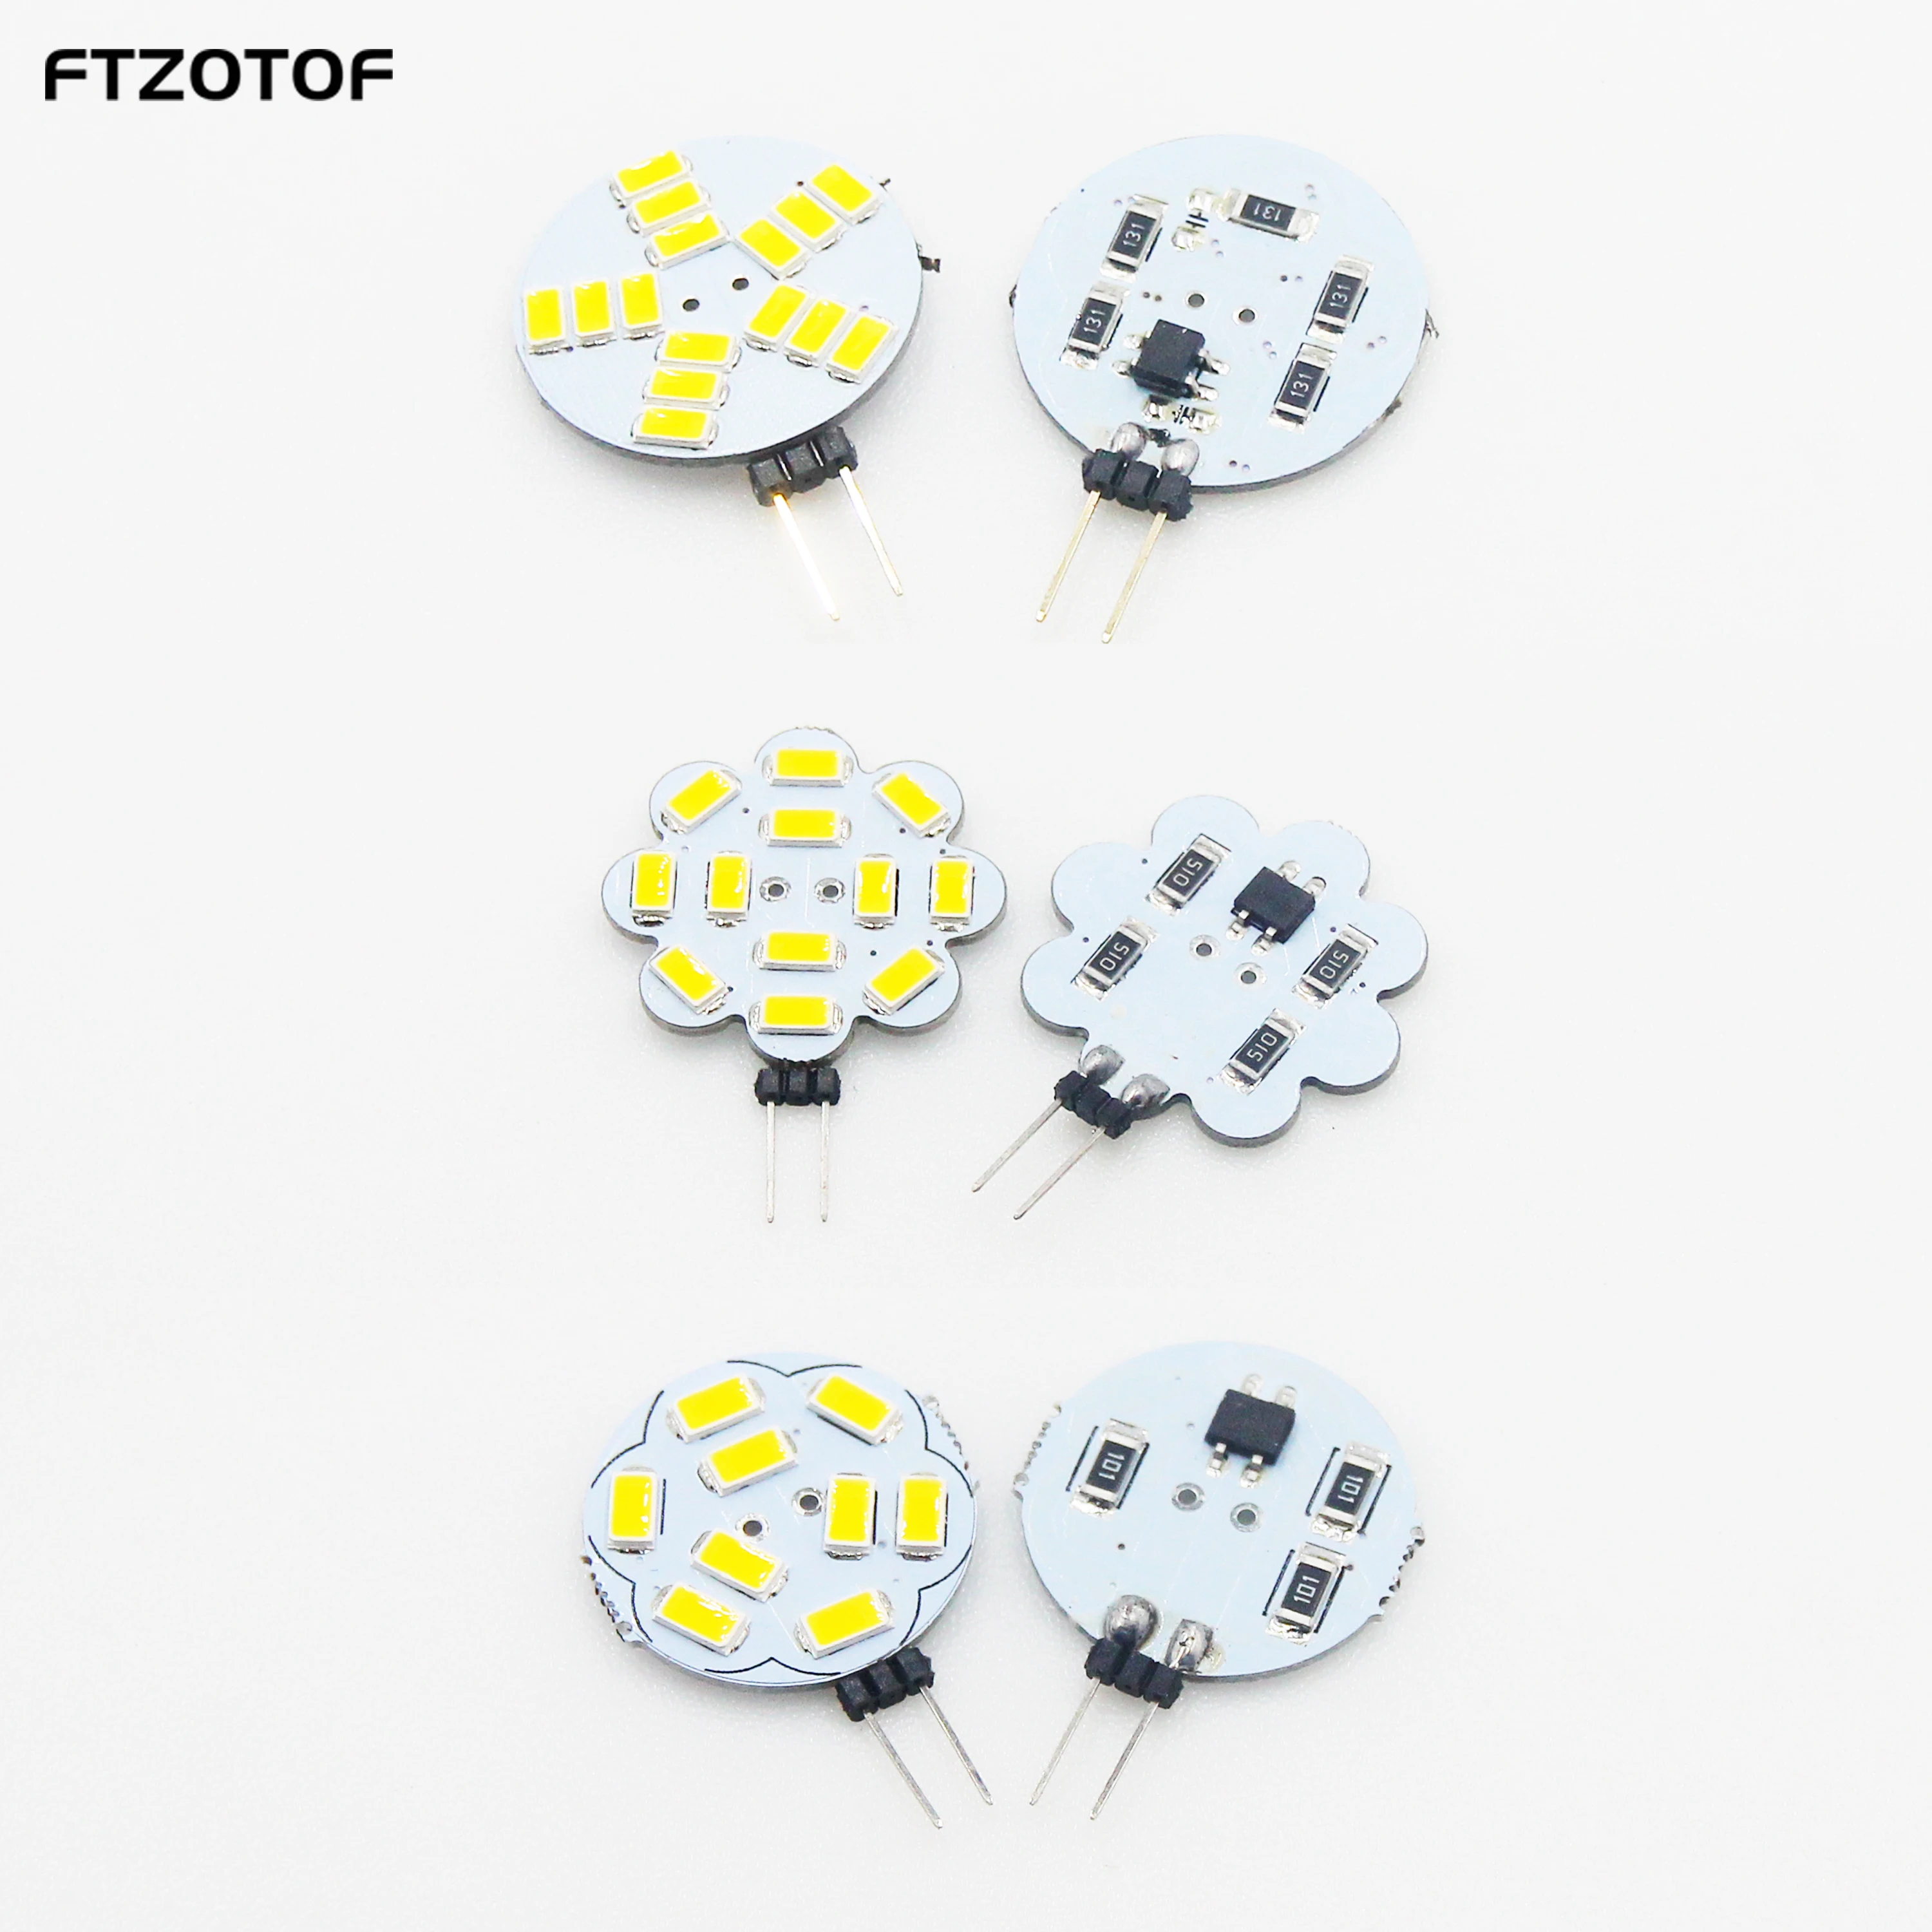 

FTZOTOF SMD 5730 G4 LED COB Chip 12V On Dc Replacement Halogen 120 Bulb 1.8W 2.4W 3W Warm Cool White For Home Lamp Lighti Source